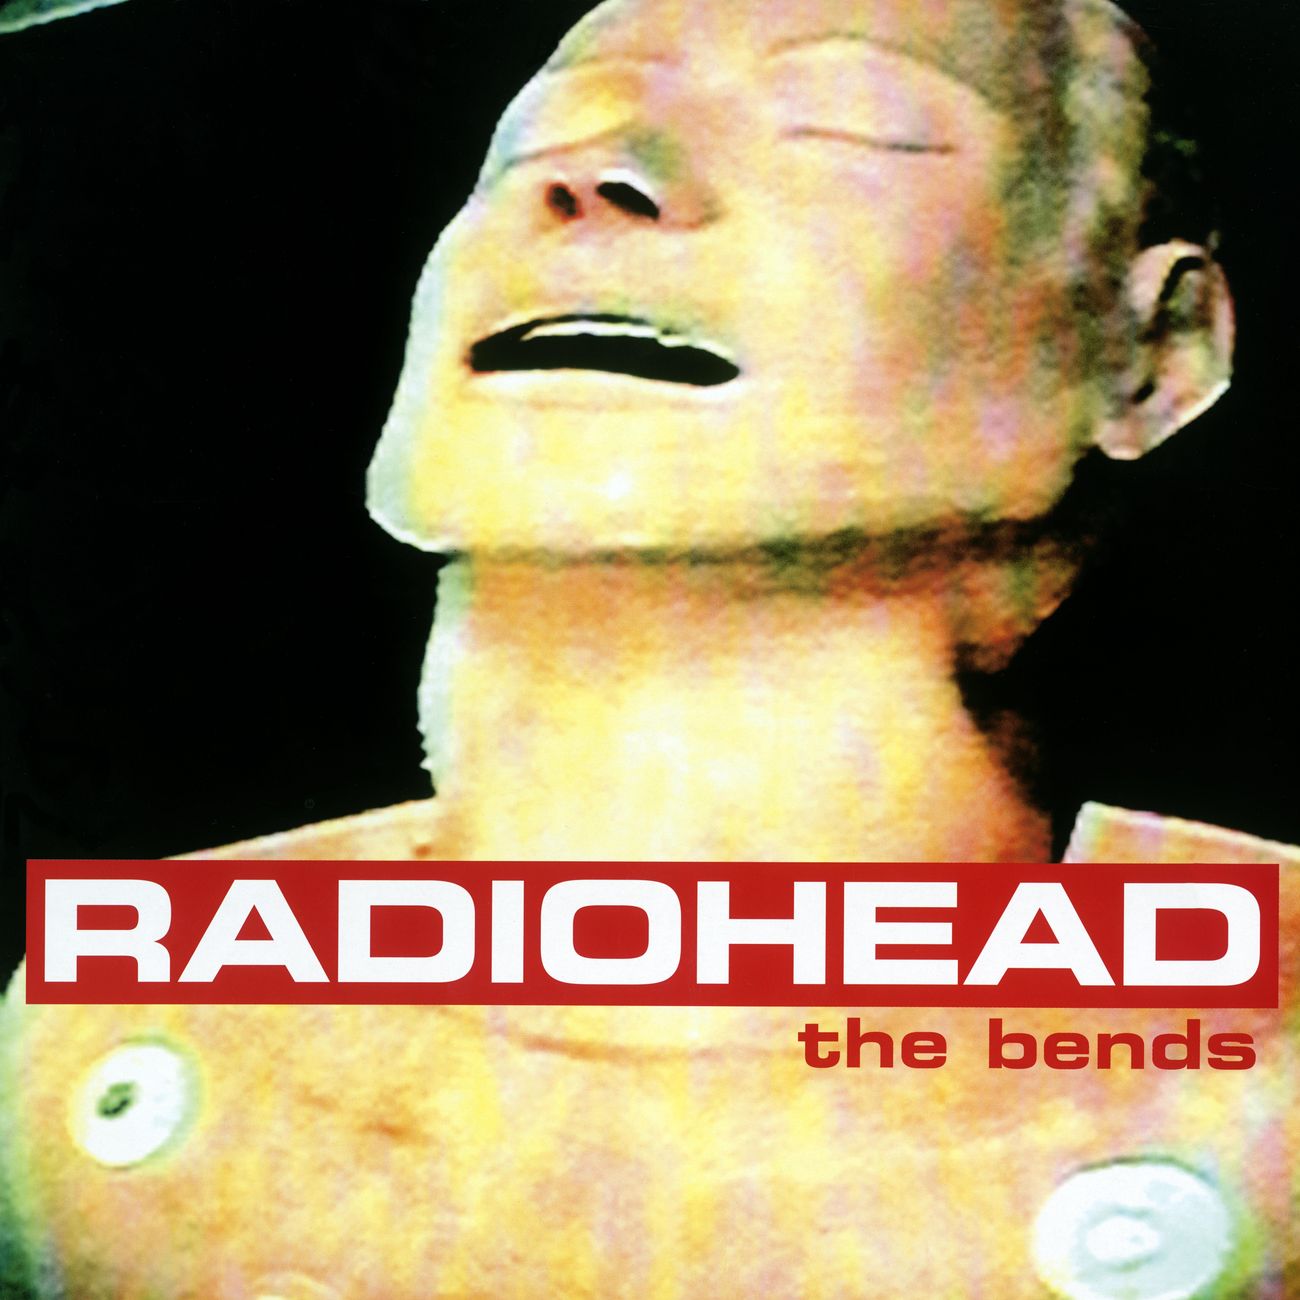 Radiohead - The Bends (Collectors Edition)